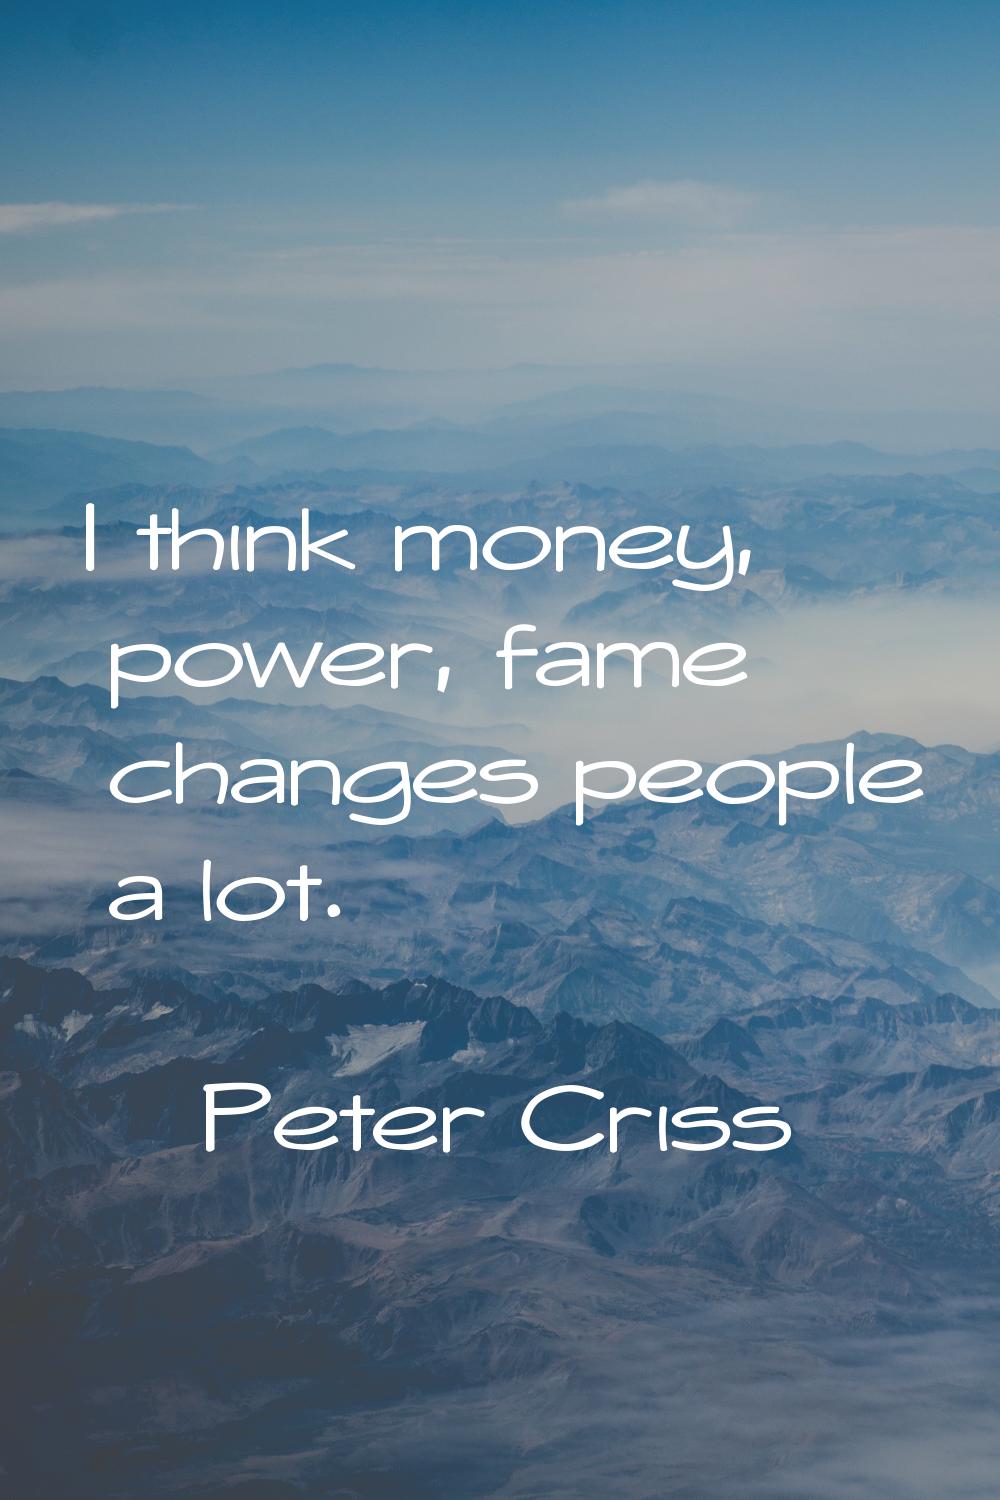 I think money, power, fame changes people a lot.